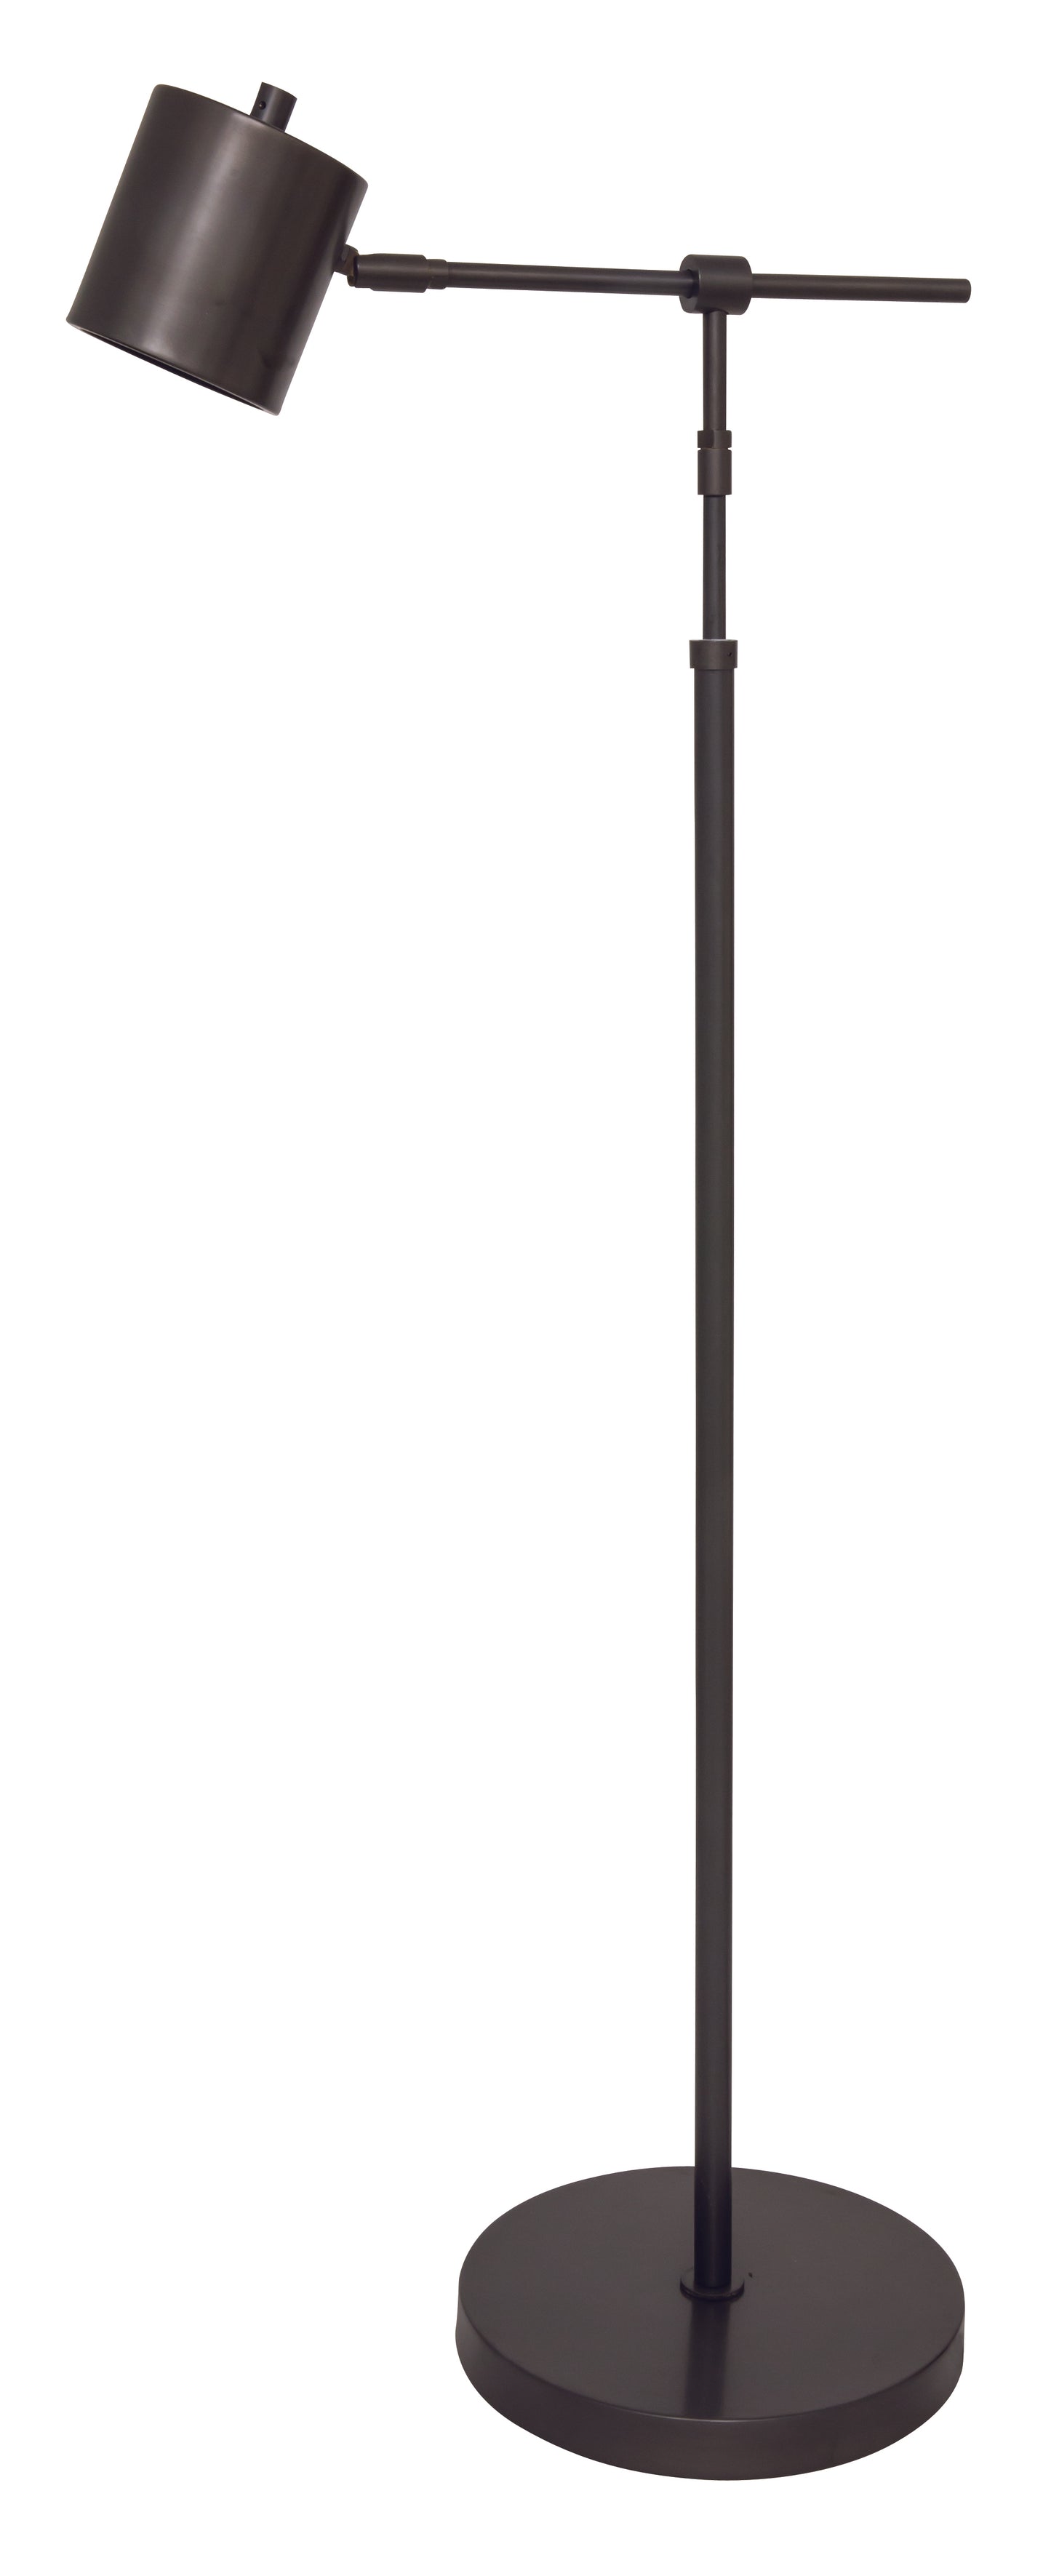 House of Troy Morris Adjustable LED Floor Lamp in Oil Rubbed Bronze MO200-OB